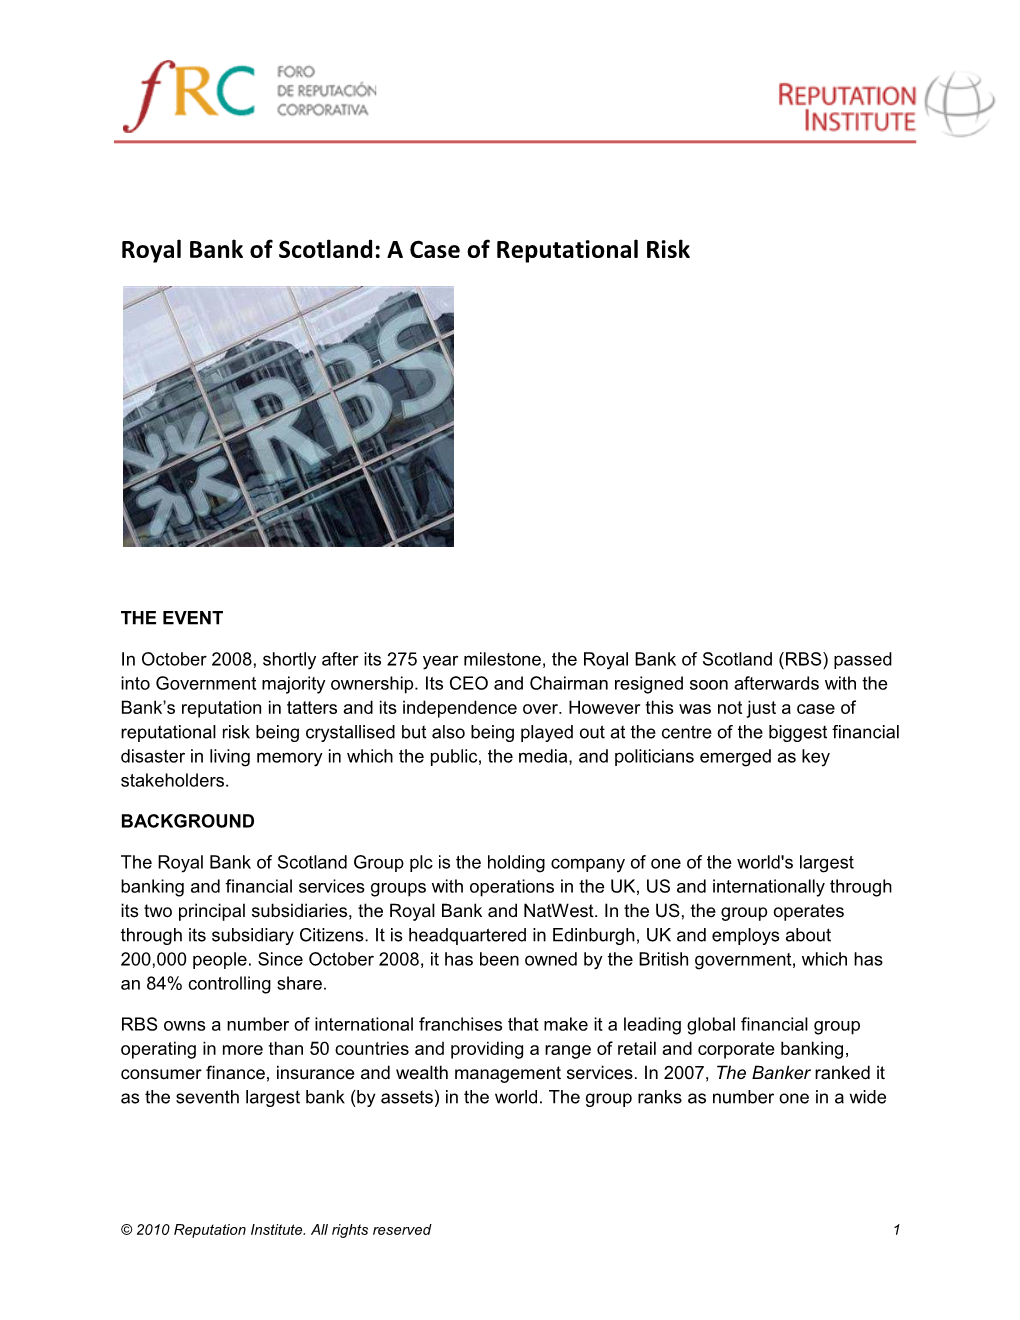 Royal Bank of Scotland: a Case of Reputational Risk